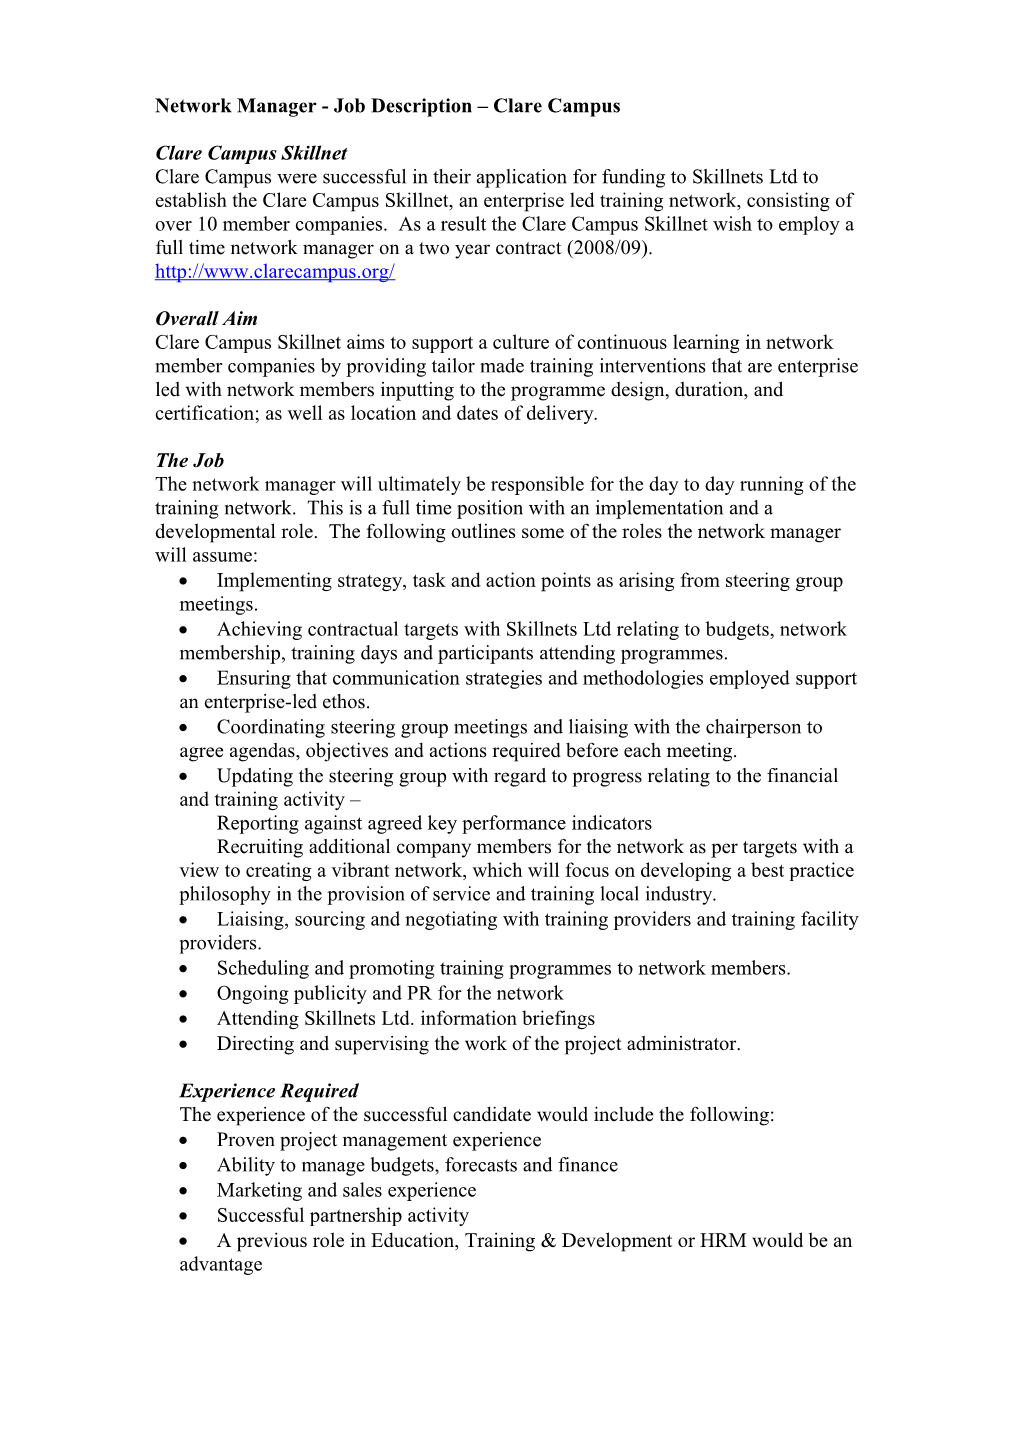 Network Manager - Job Vacancy Clare Campus